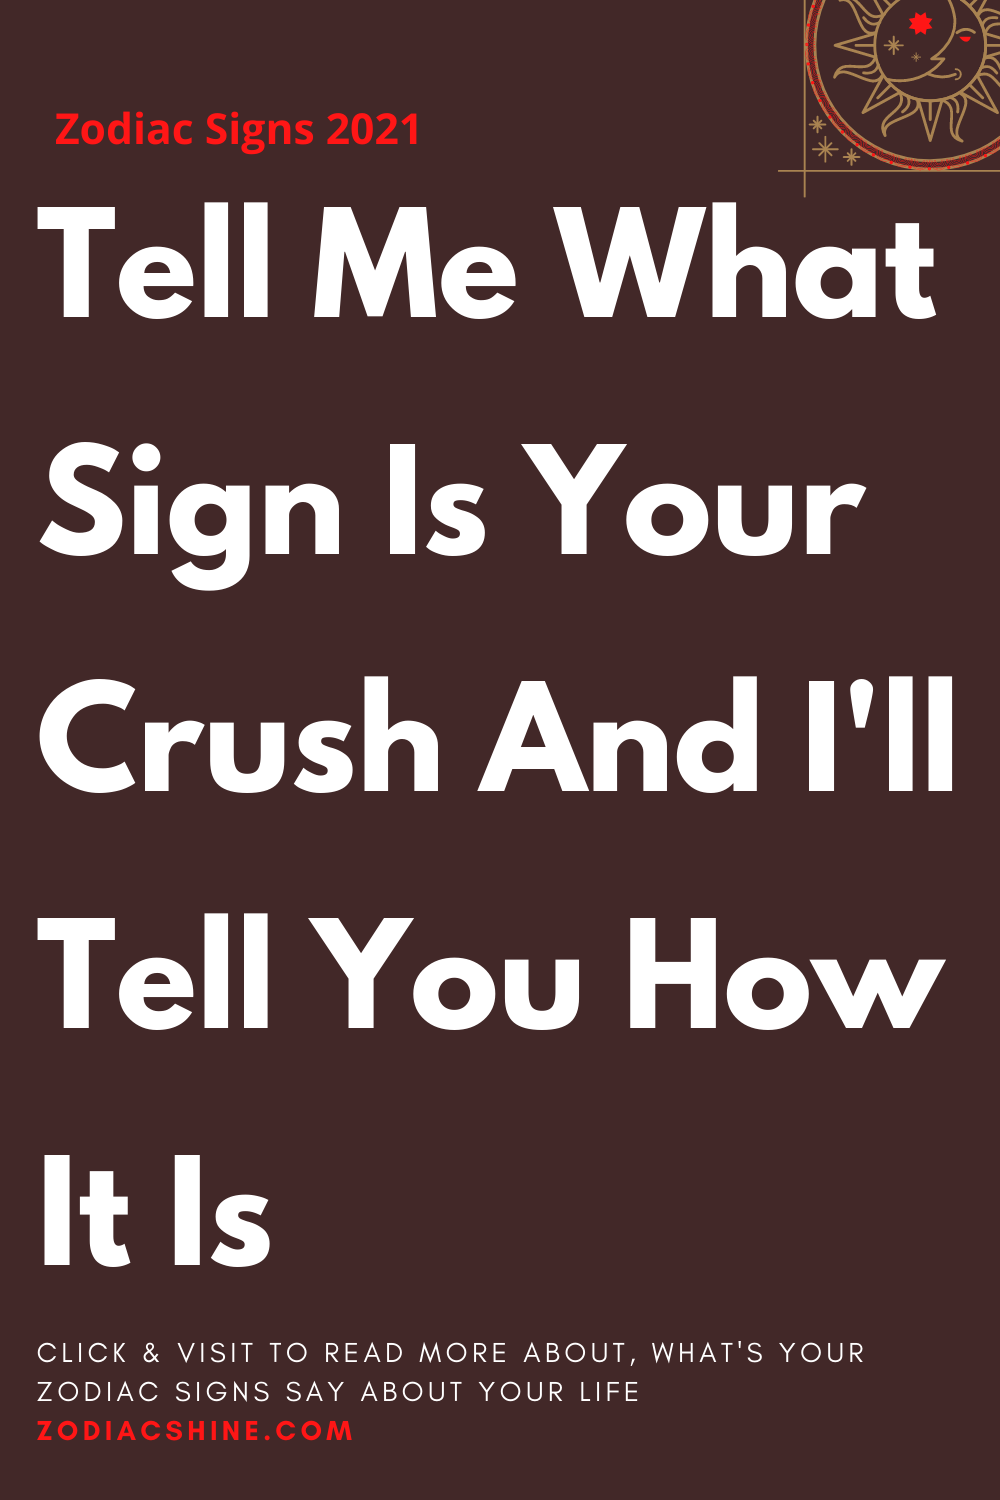 Tell Me What Sign Is Your Crush And I'll Tell You How It Is